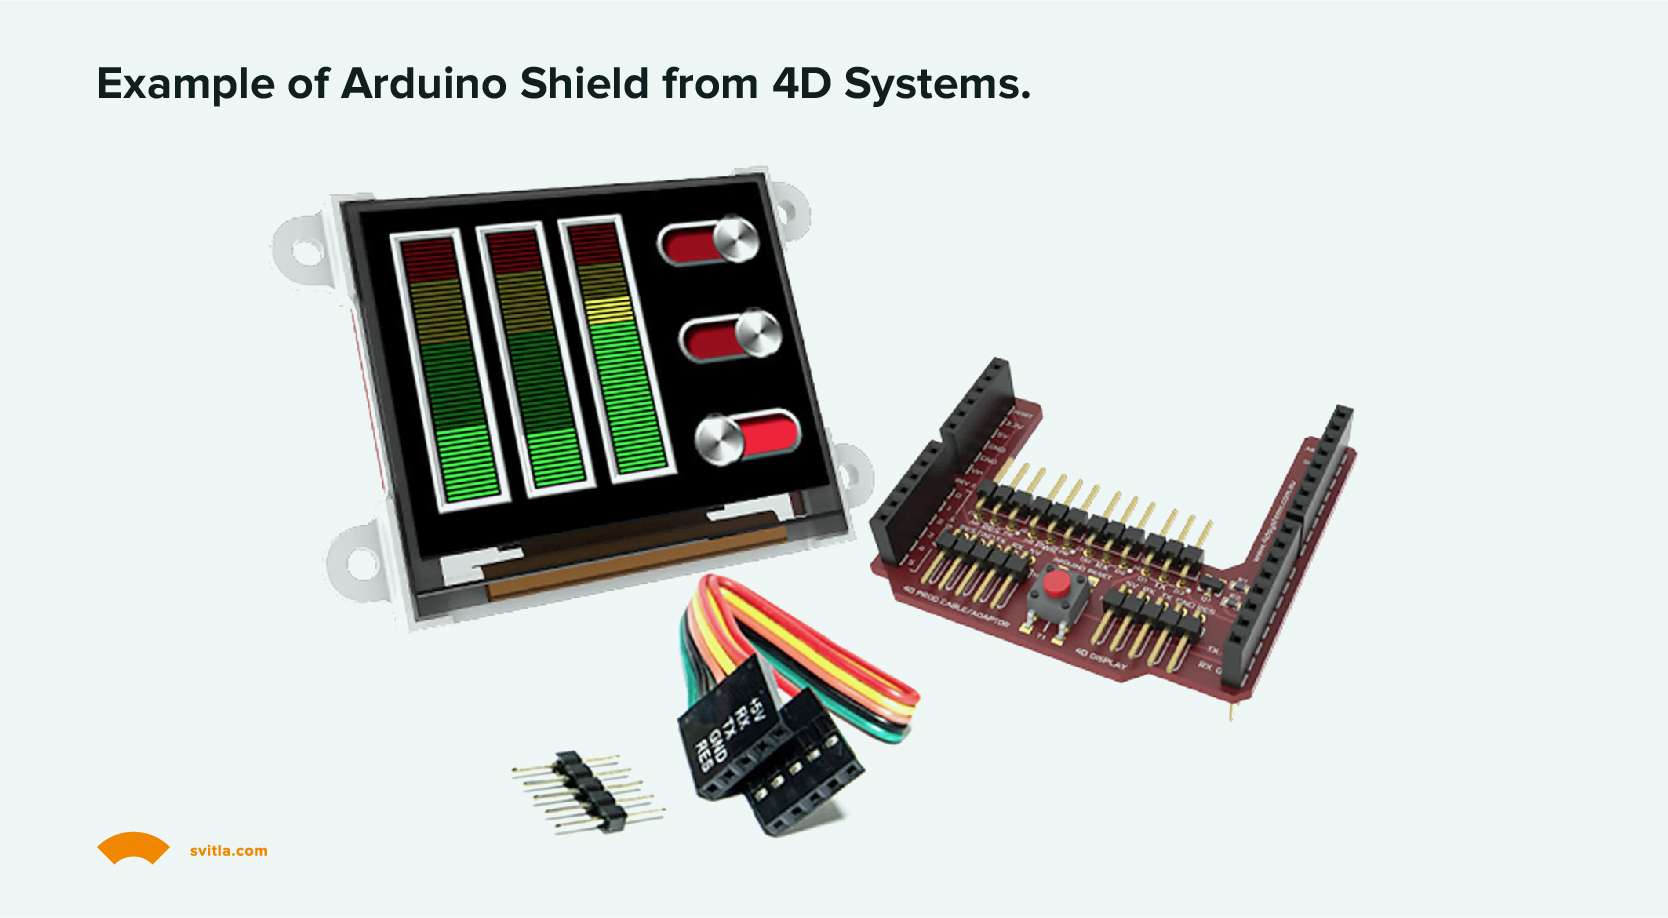 Example of Arduino Shield from 4D Systems